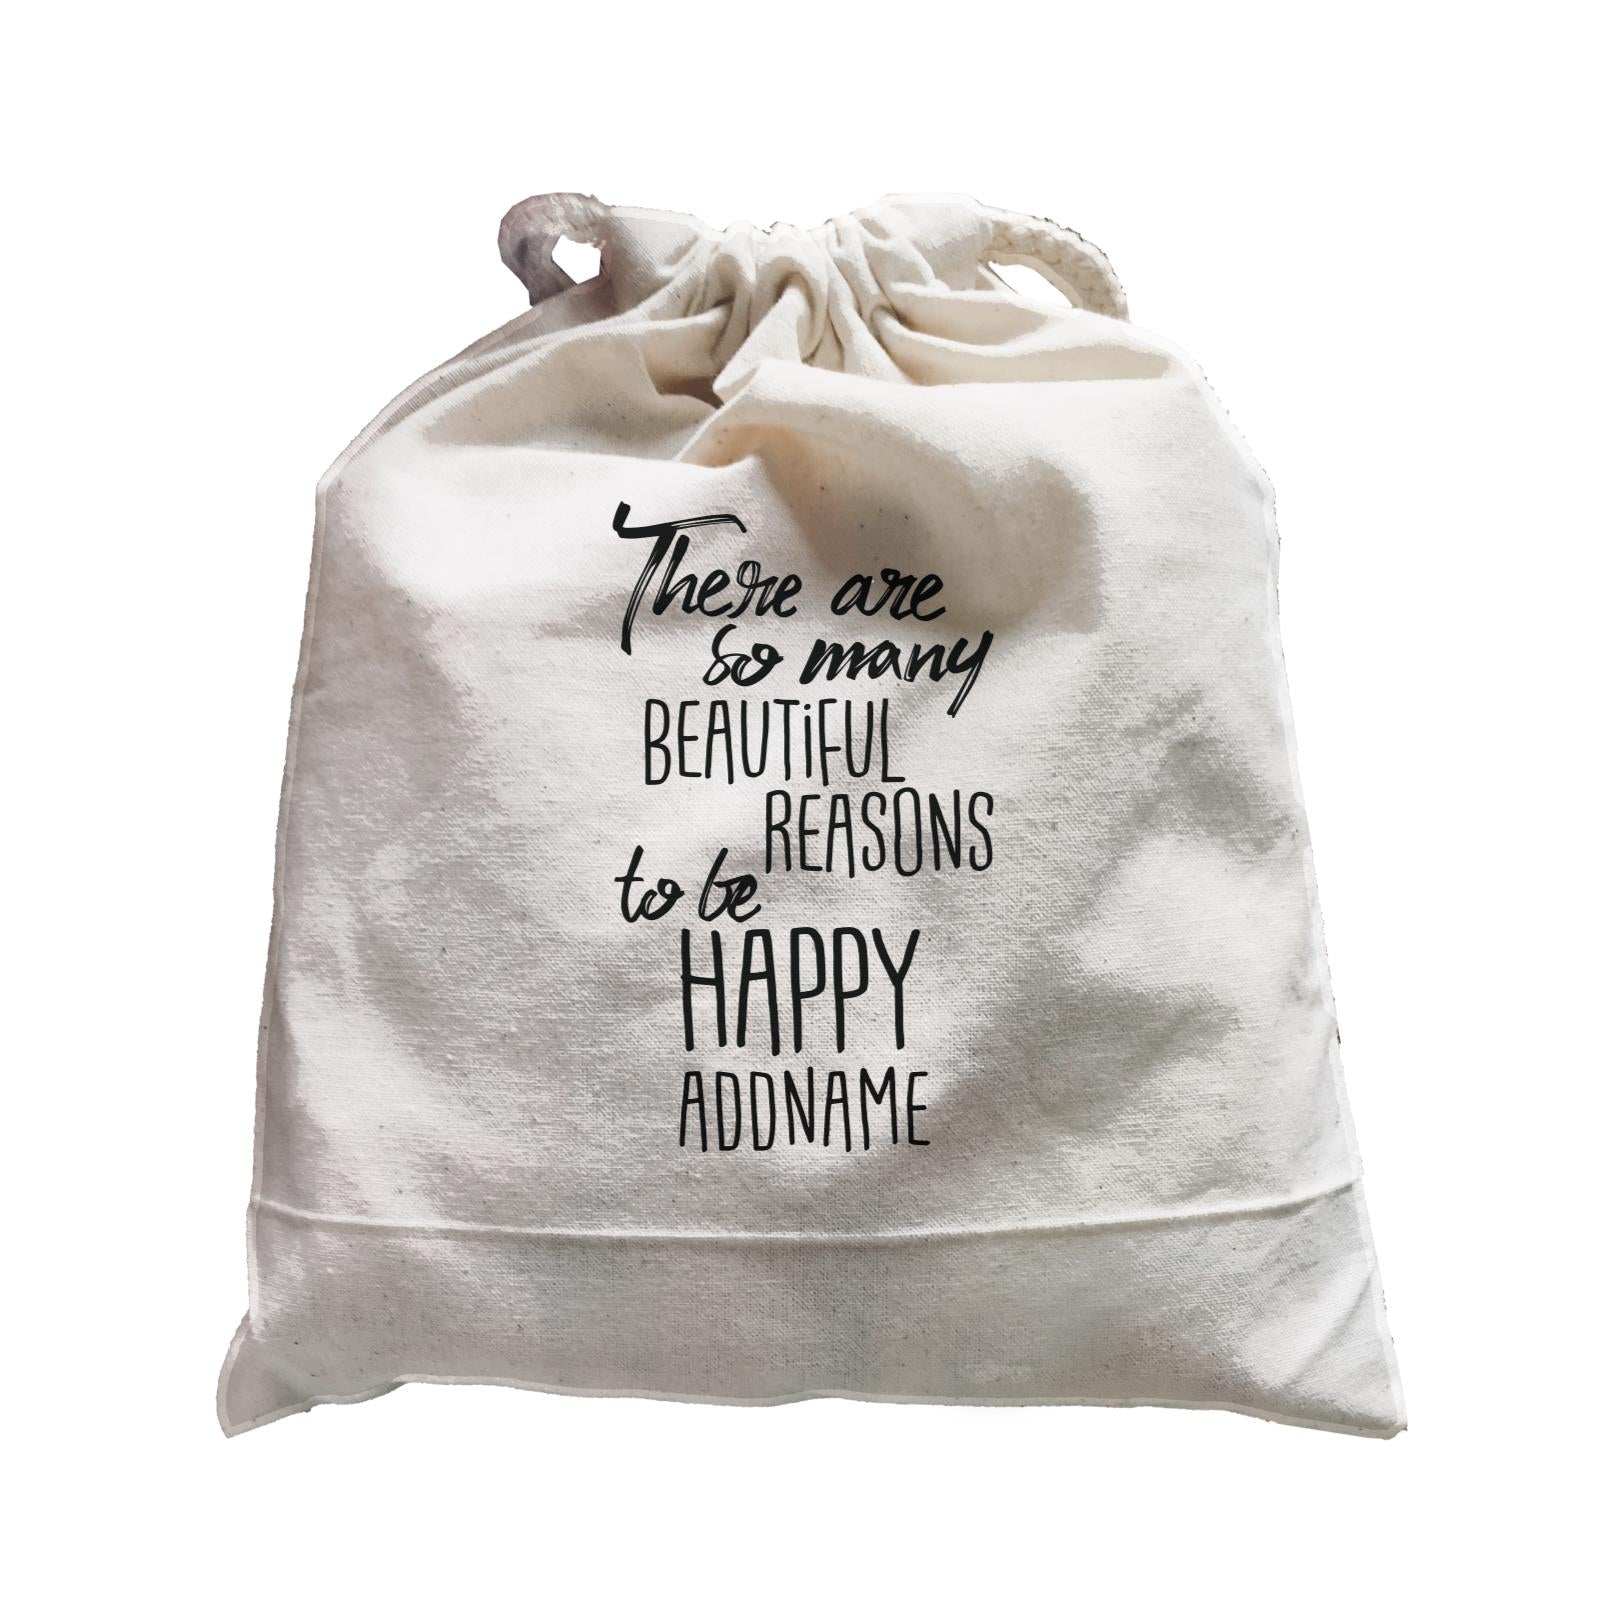 Inspiration Quotes There Are So Many Beautiful Reasons To Be Happy Addname Satchel